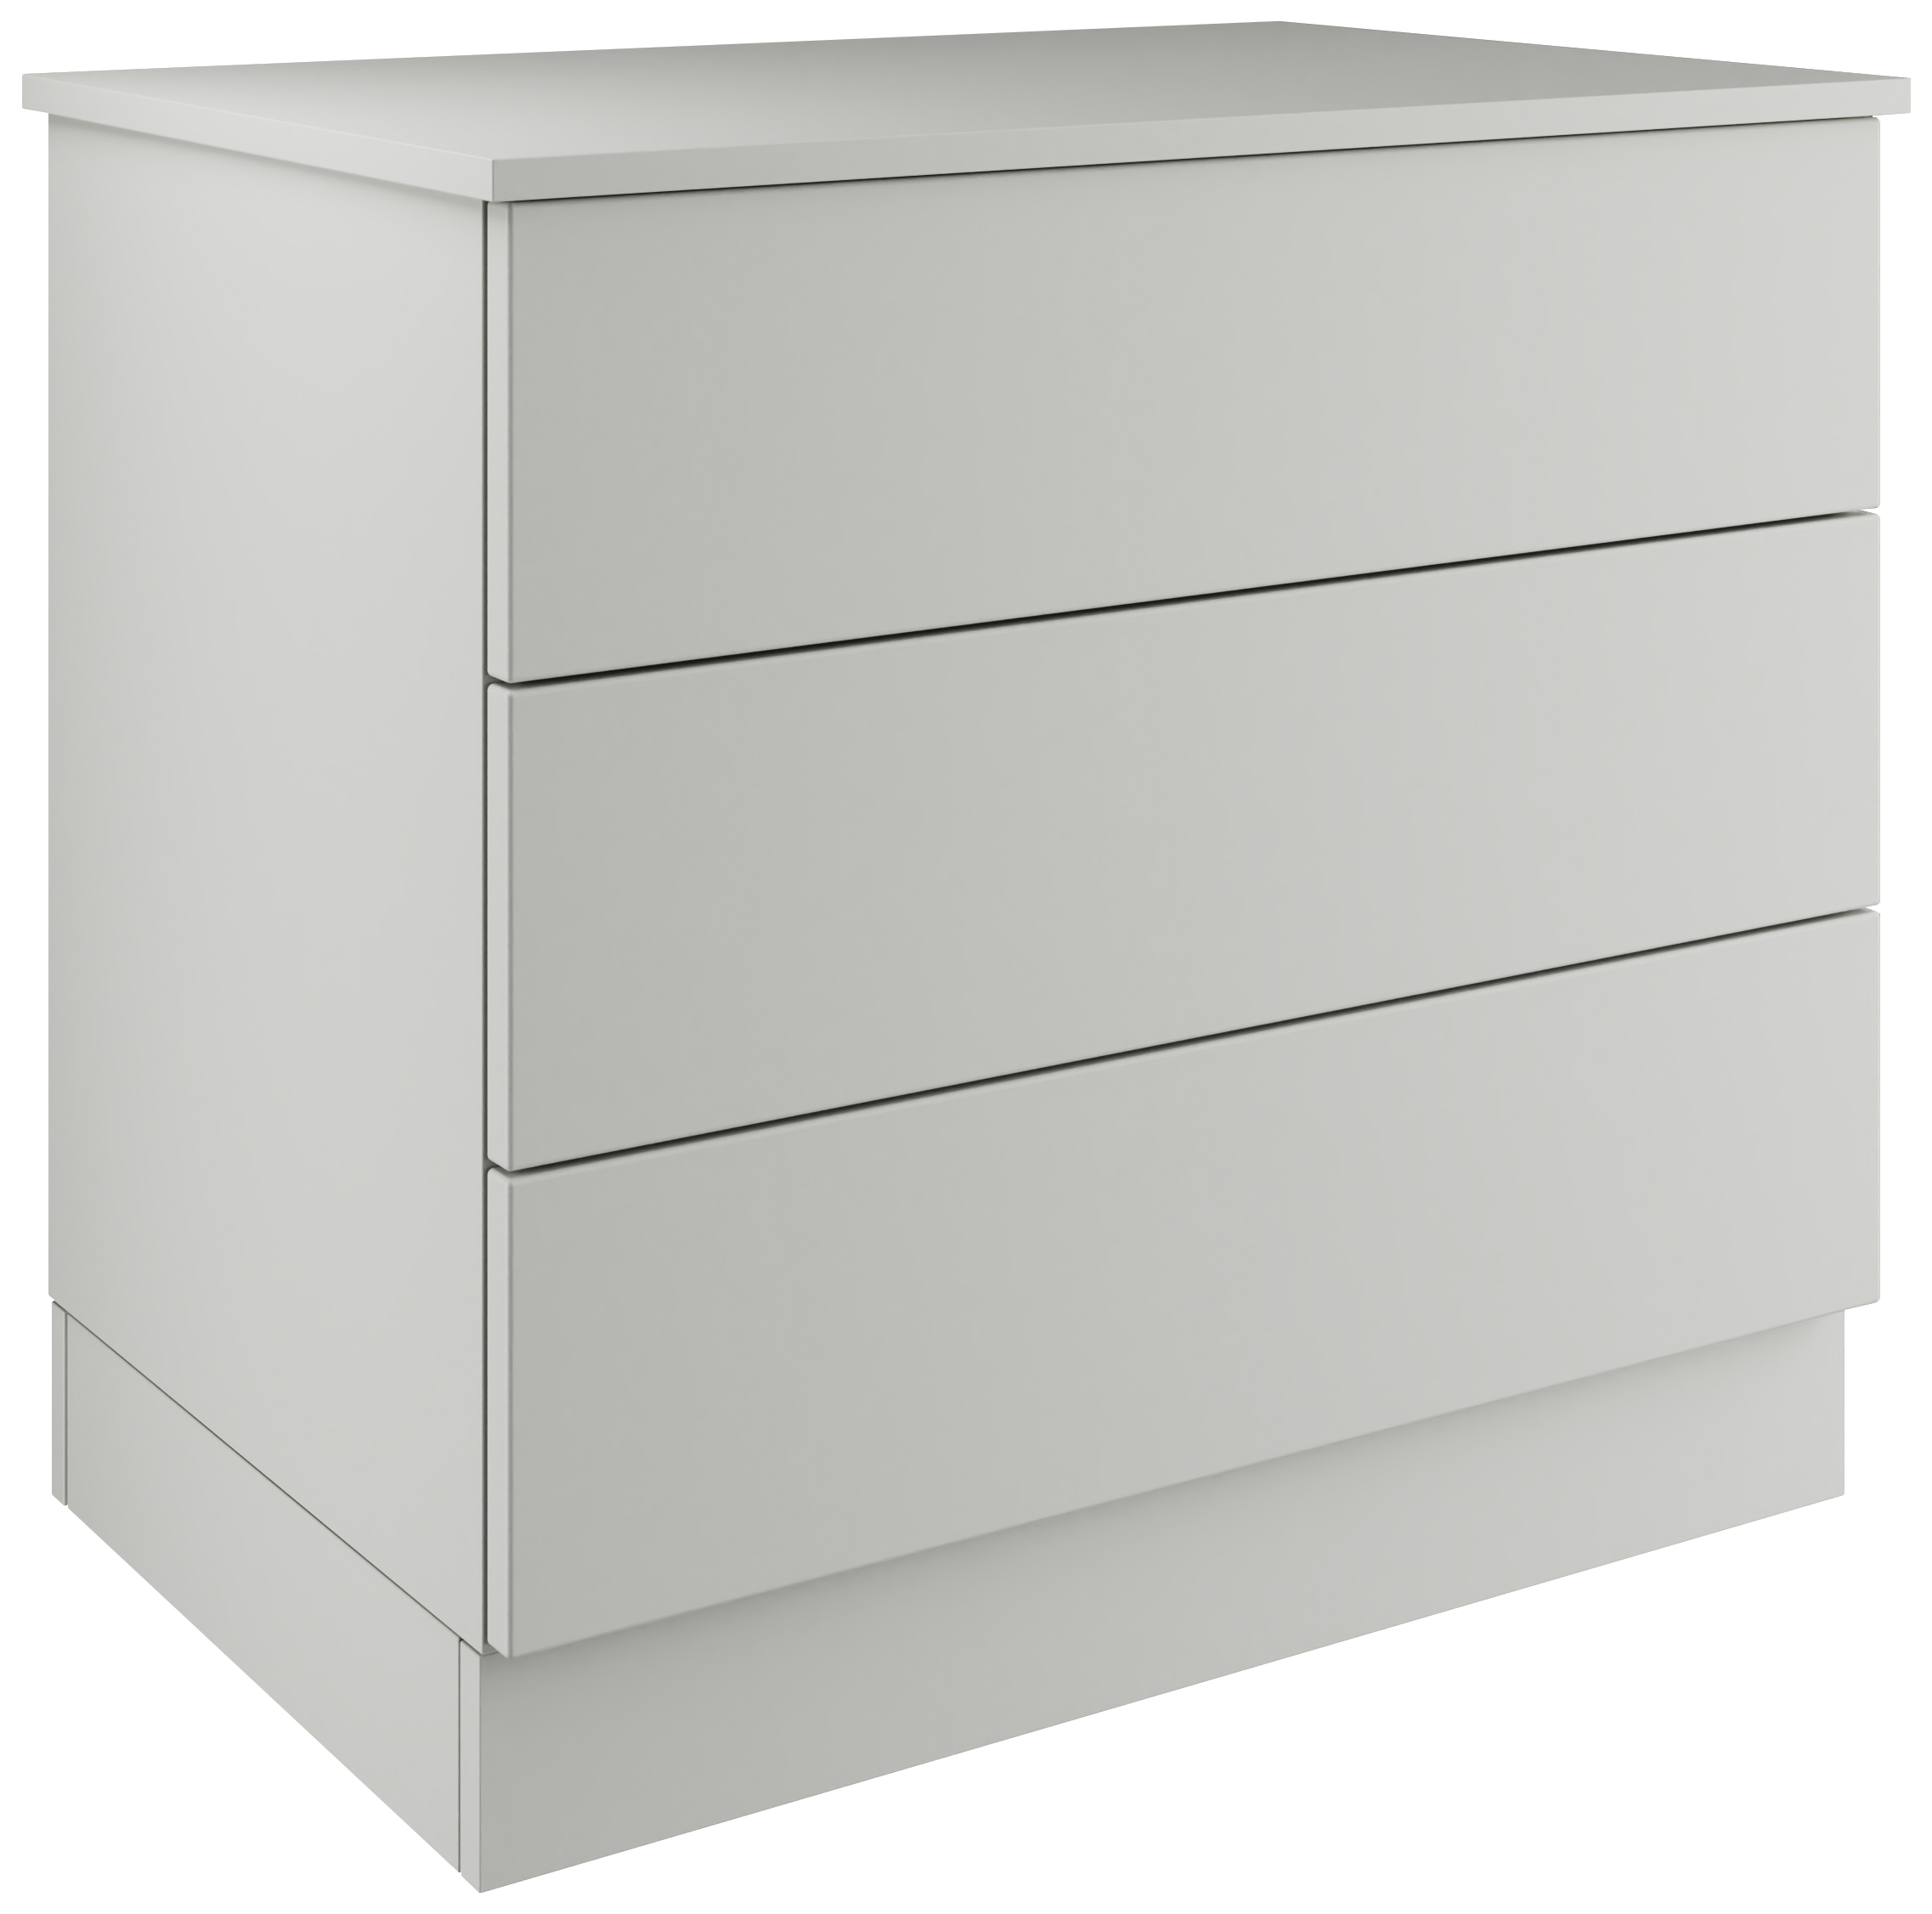 Malton Light Grey Double Chest with 3 Drawers - 820 x 730 x 520mm